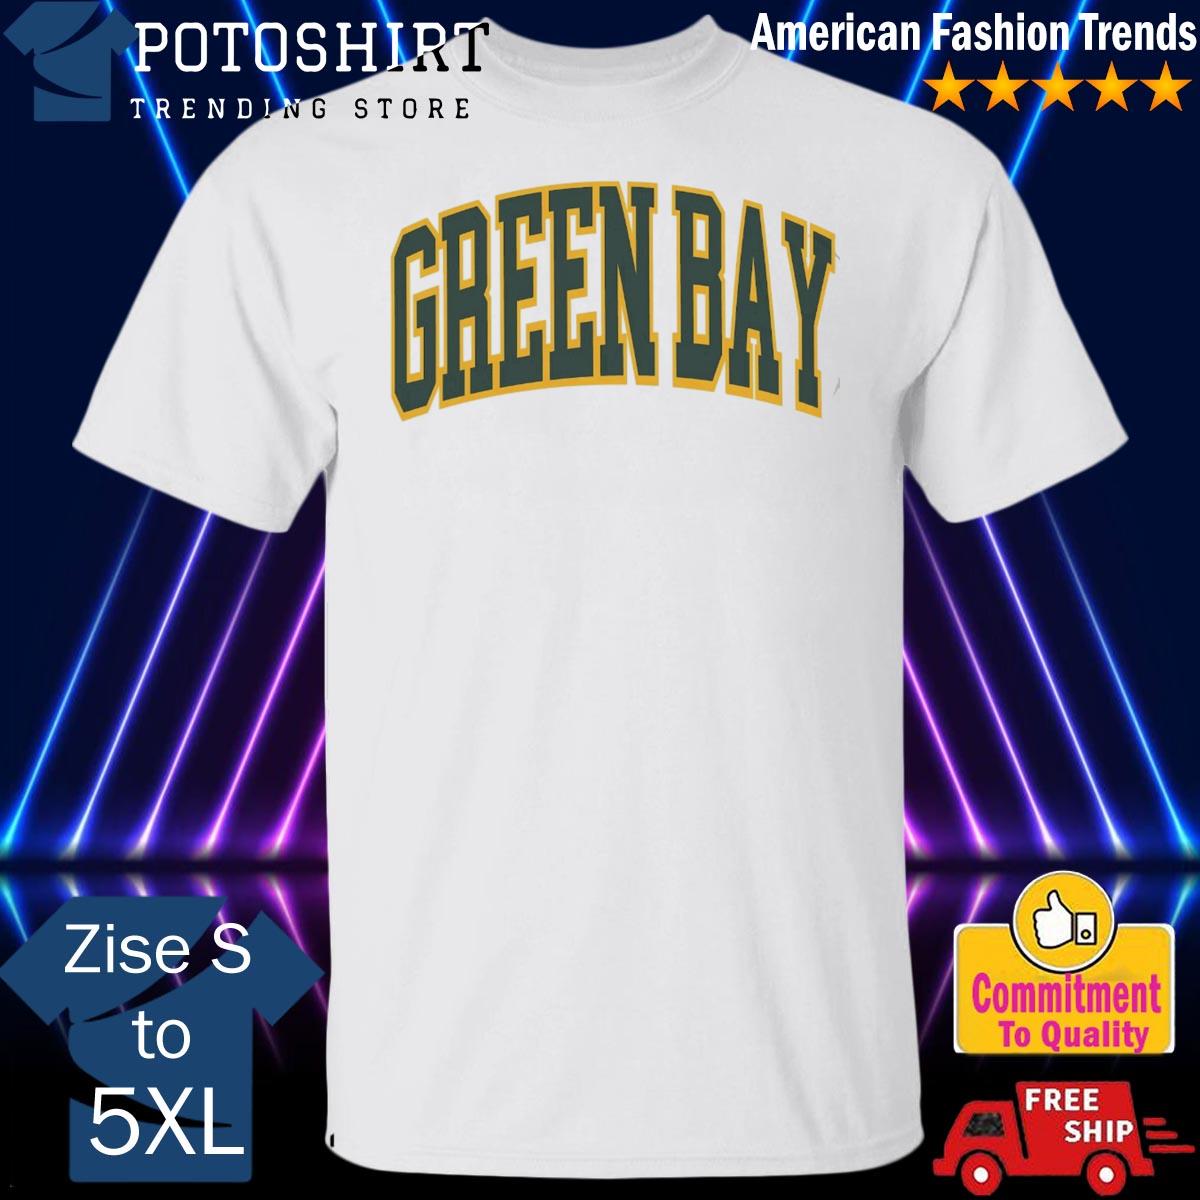 vintage packers t shirts